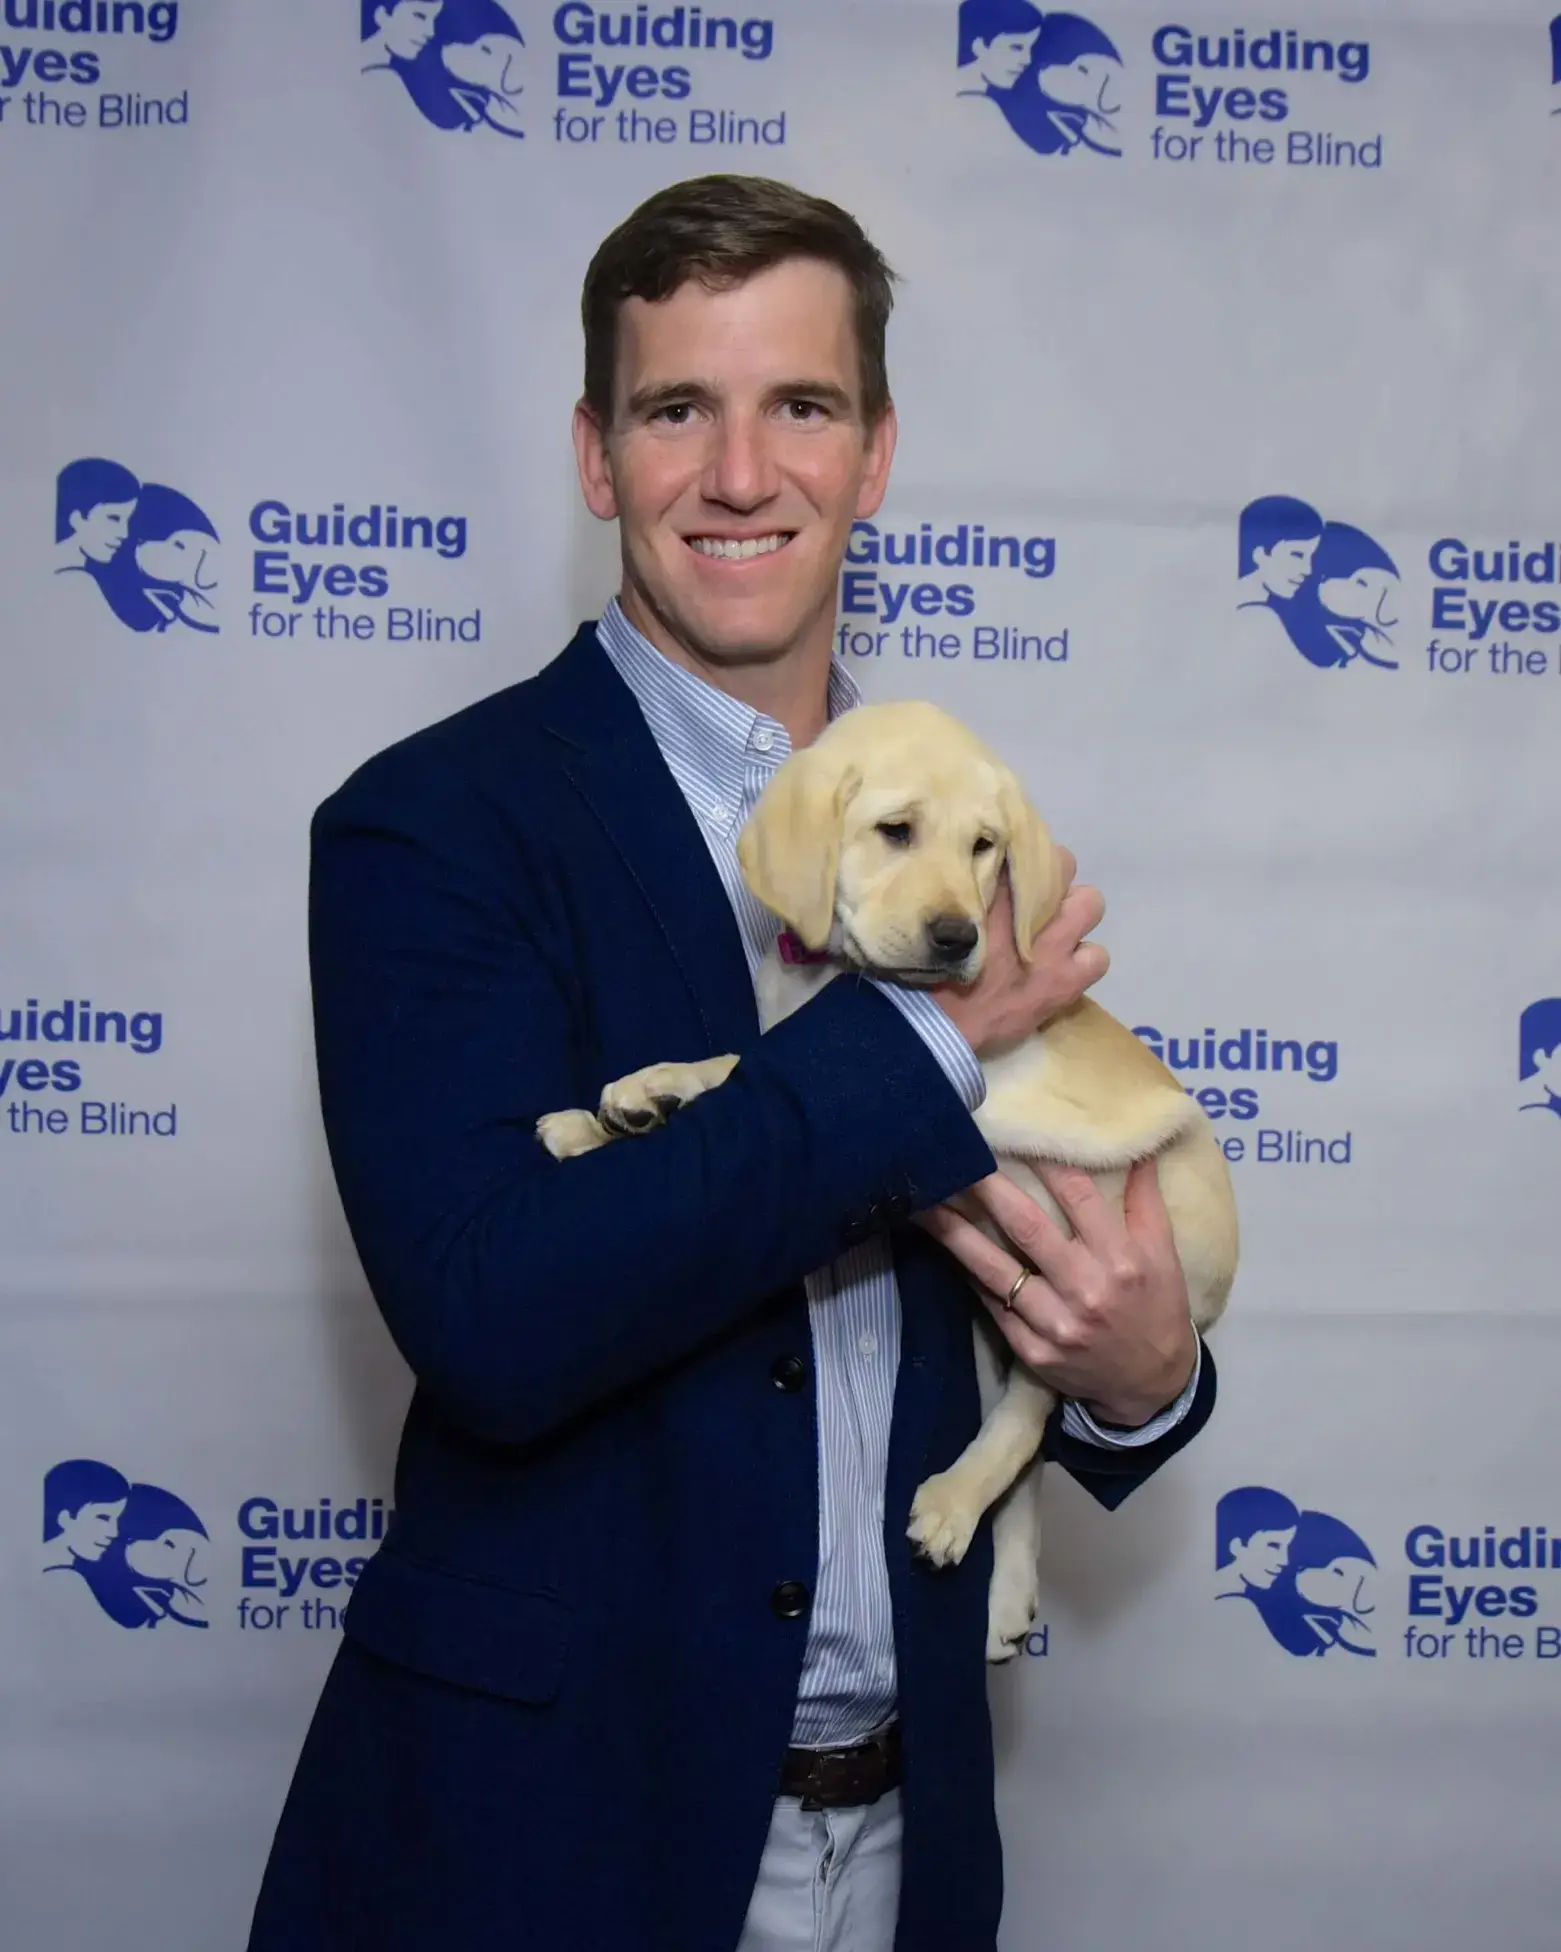 Eli Manning stands in front of a step and repeat at a Guiding Eyes event